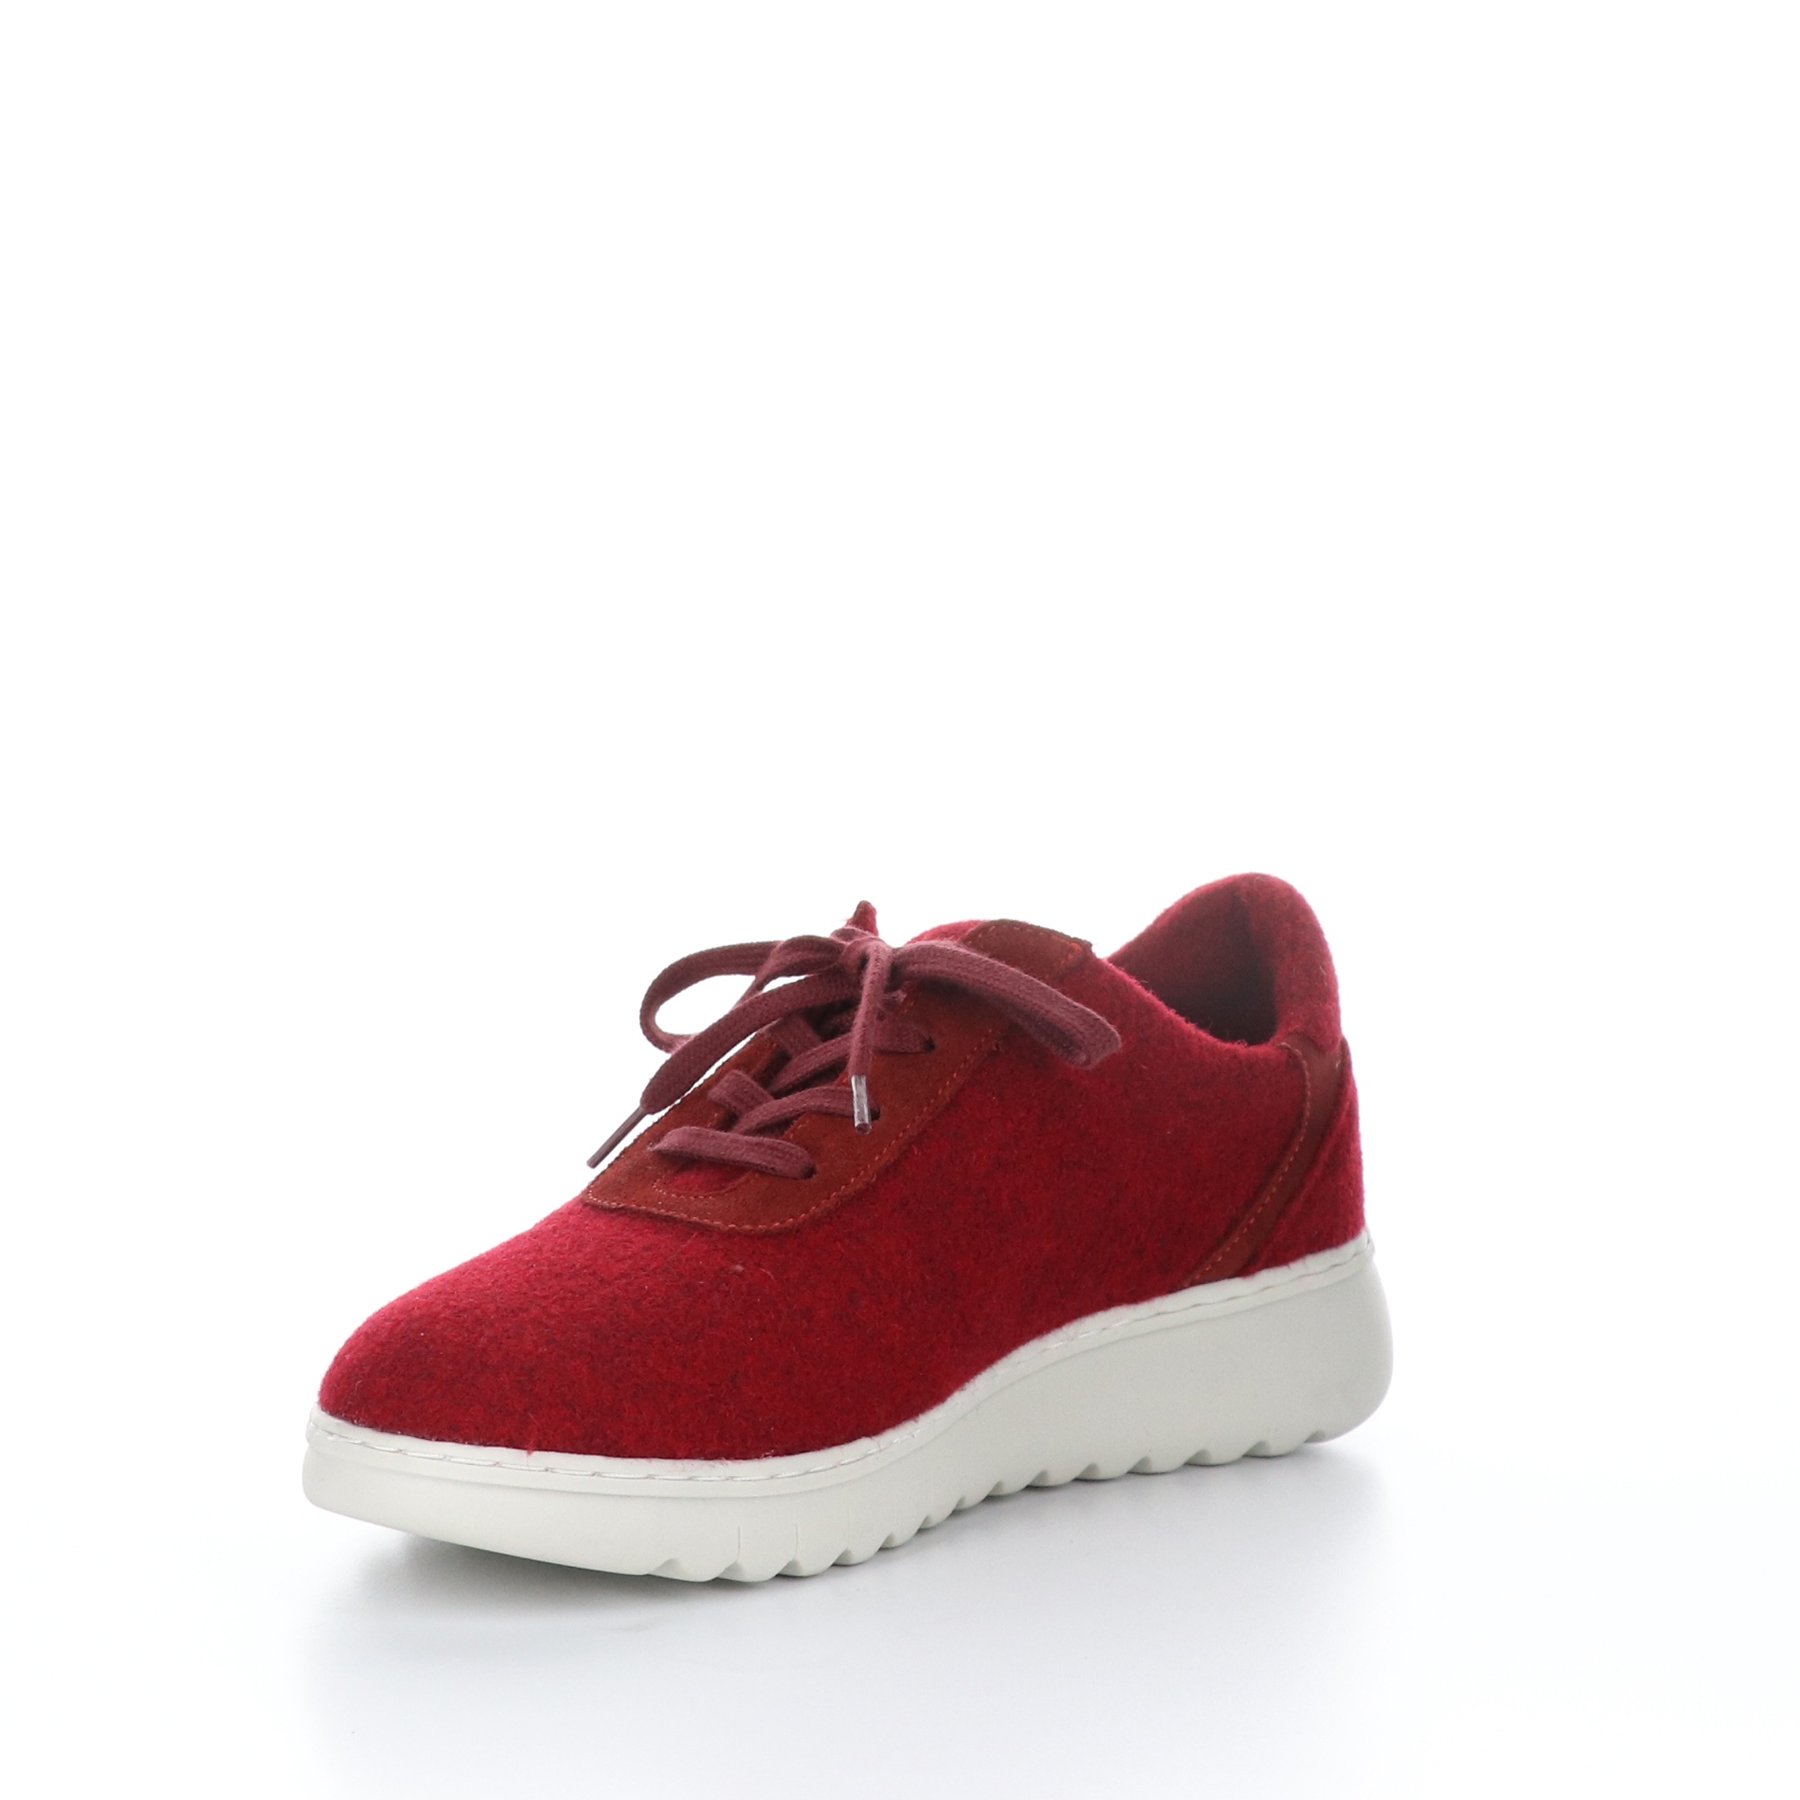 Inner front side view of the softinos elra sneaker in red. These tweed sneakers have a lace up front and a white sole.